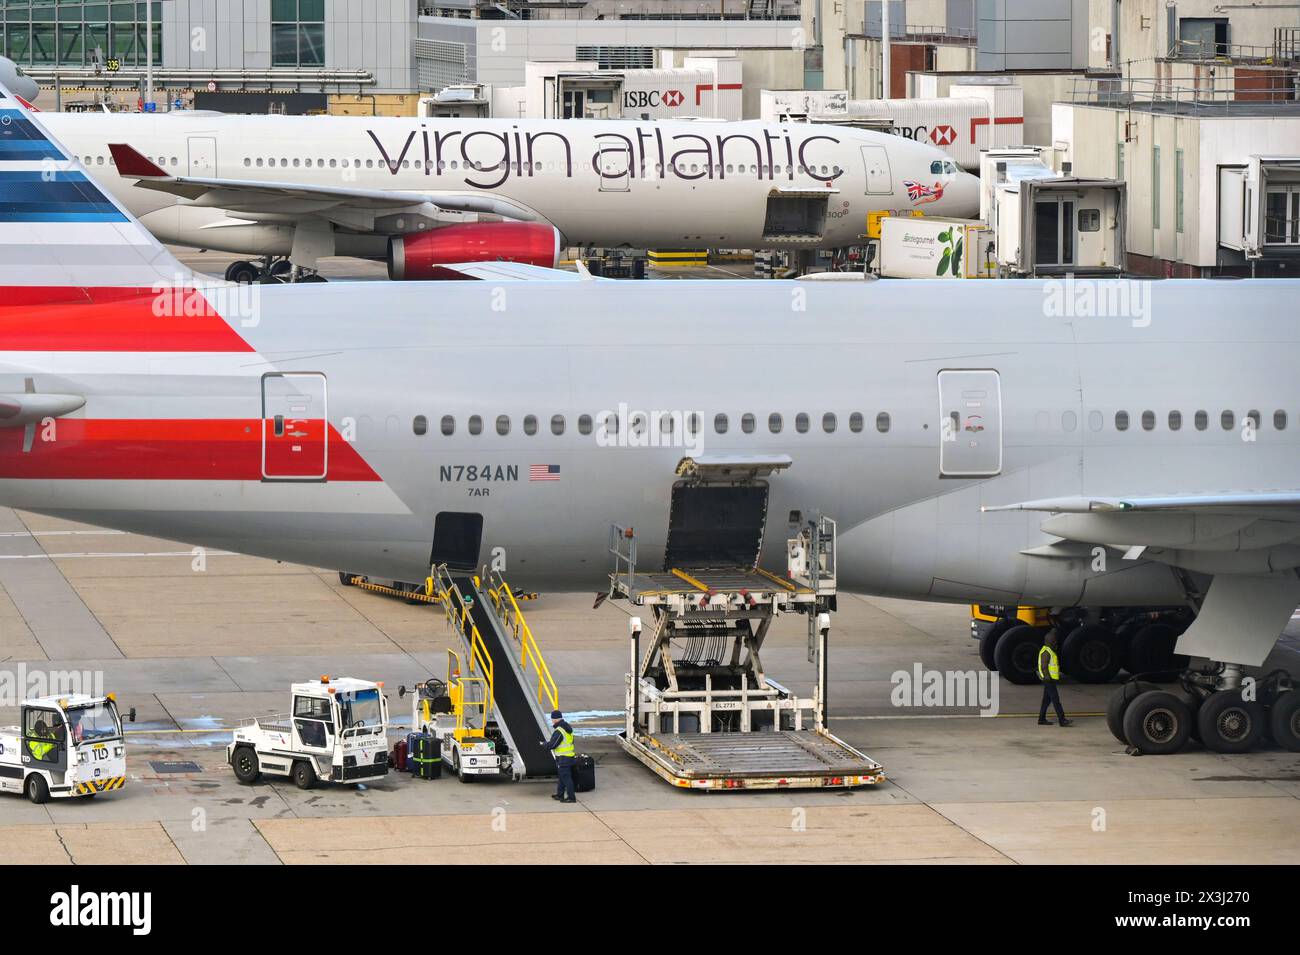 london, England, UK - 29 November 2023: Specialist loading equipment for luggage and cargo alongside an American Airlines jet at London Heathrow airpo Stock Photo